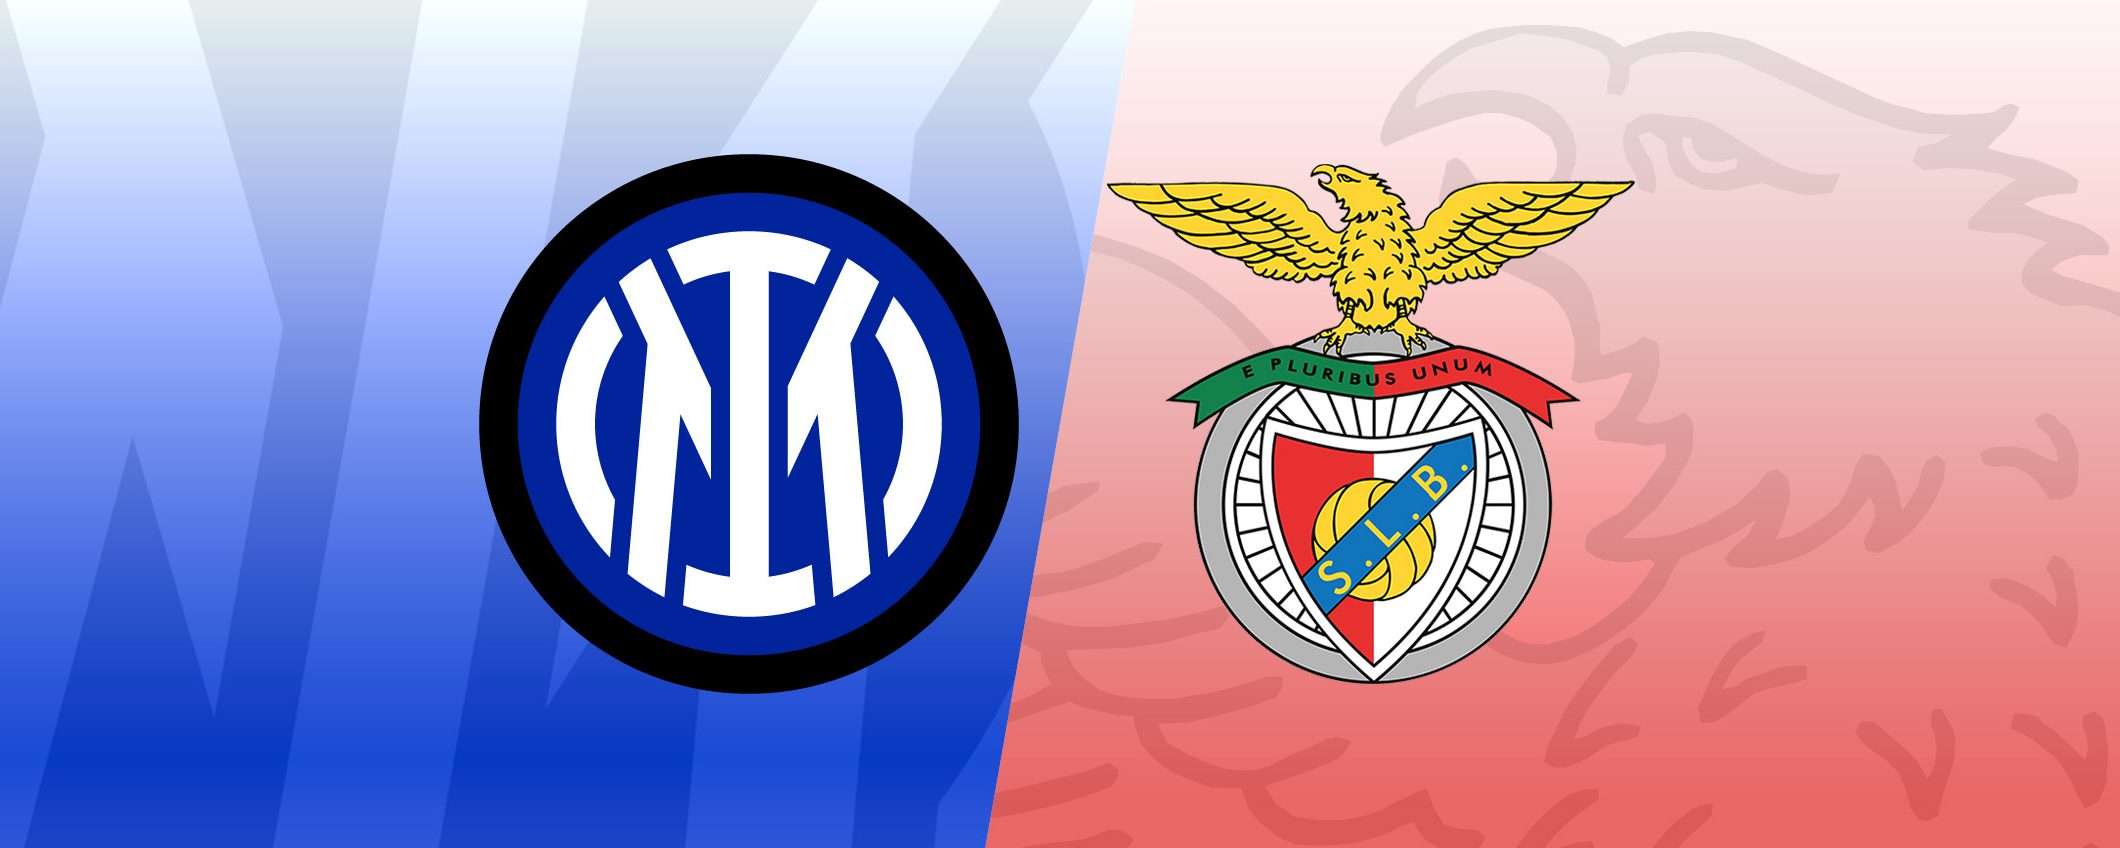 Come vedere Inter-Benfica in streaming (Champions)